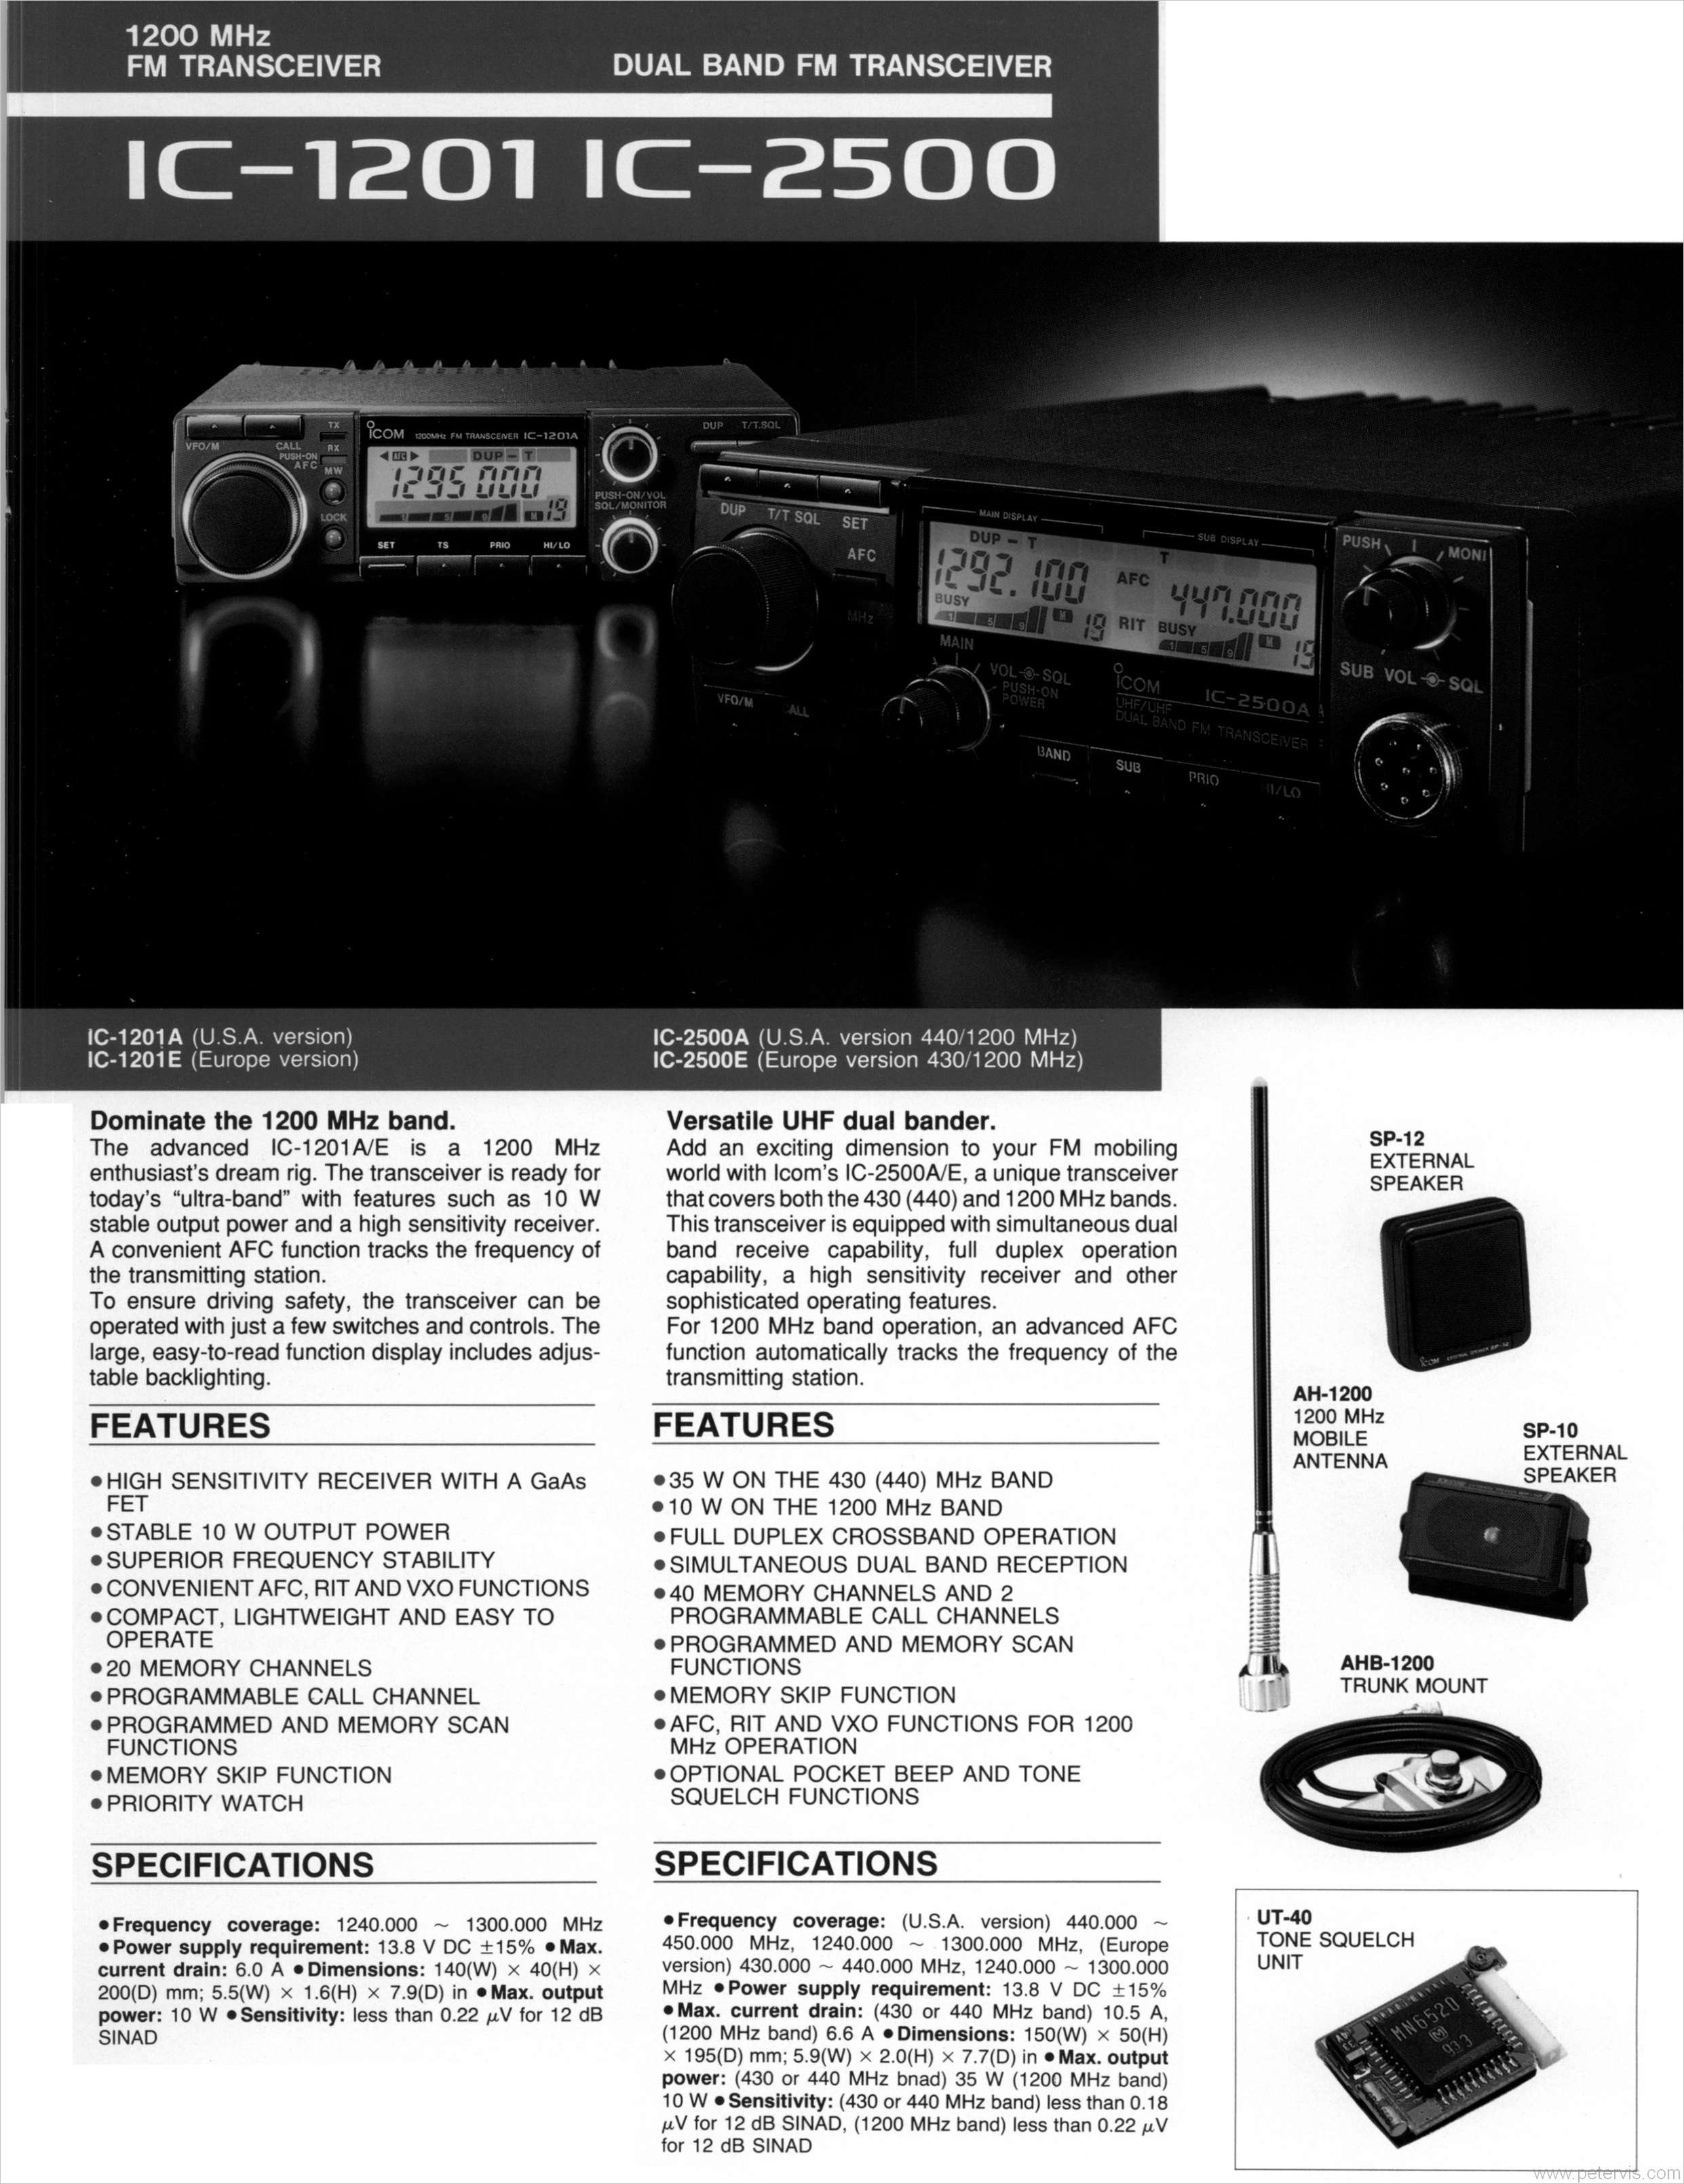 IC-1201 and IC-2500 SPECIFICATION and FEATURES